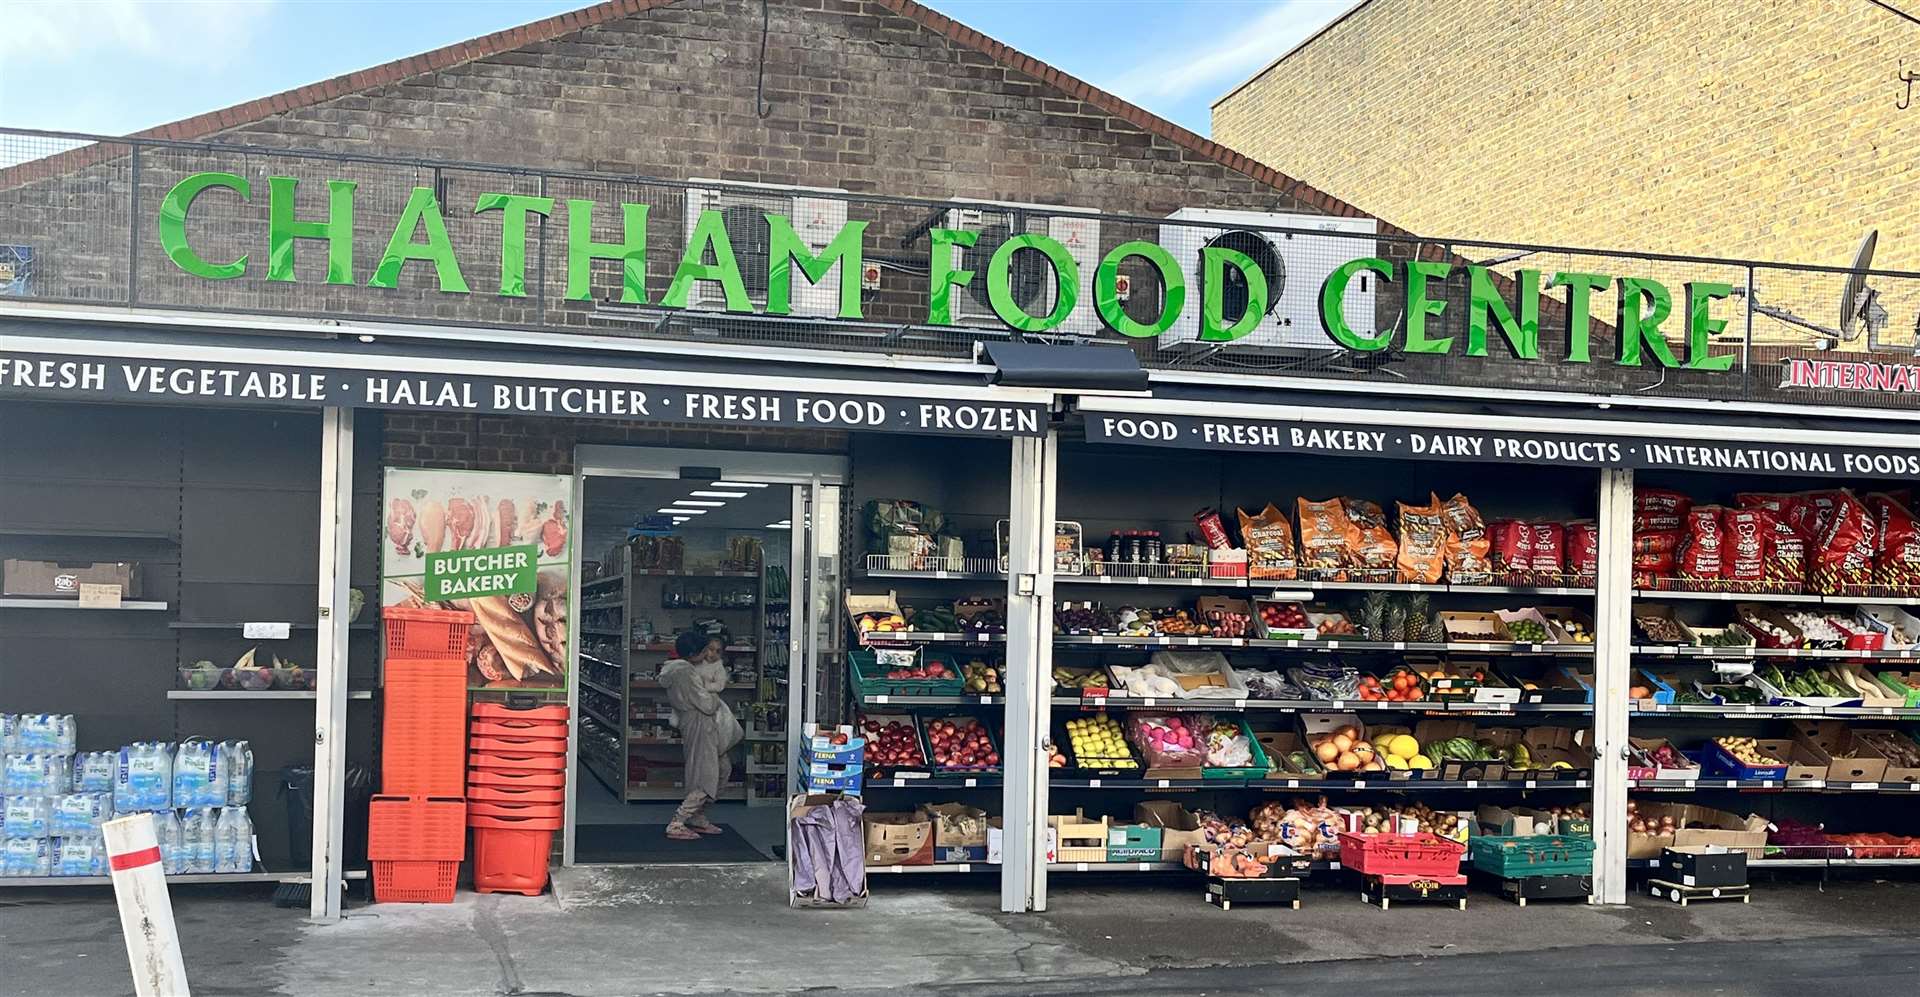 A tasty-looking food shop on Luton Road, Chatham